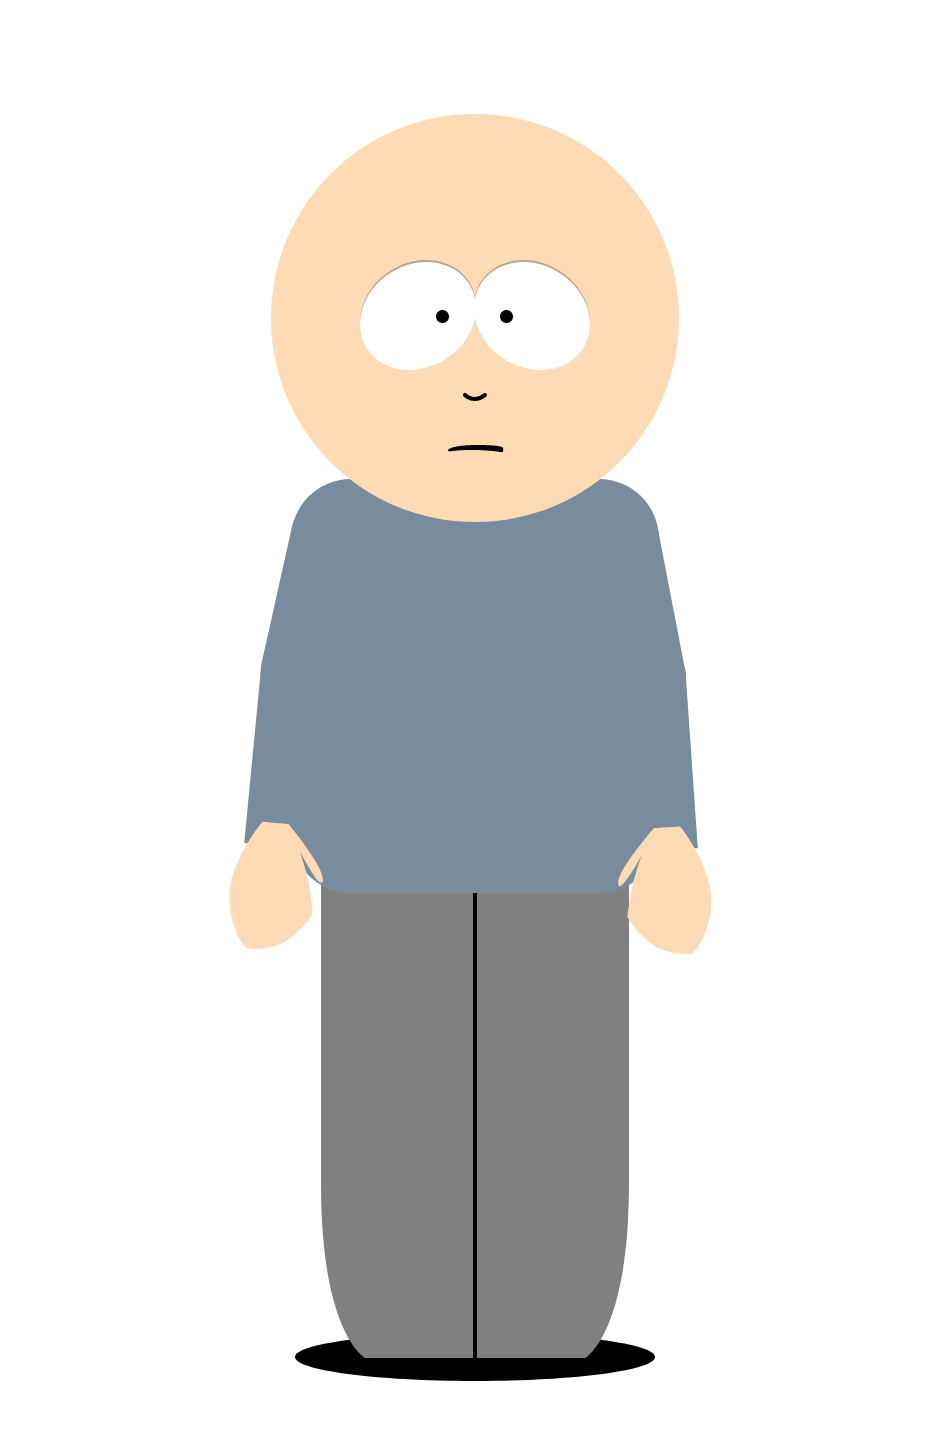 South Park S1 Character Base by YaBroGabeOFFICAL on DeviantArt